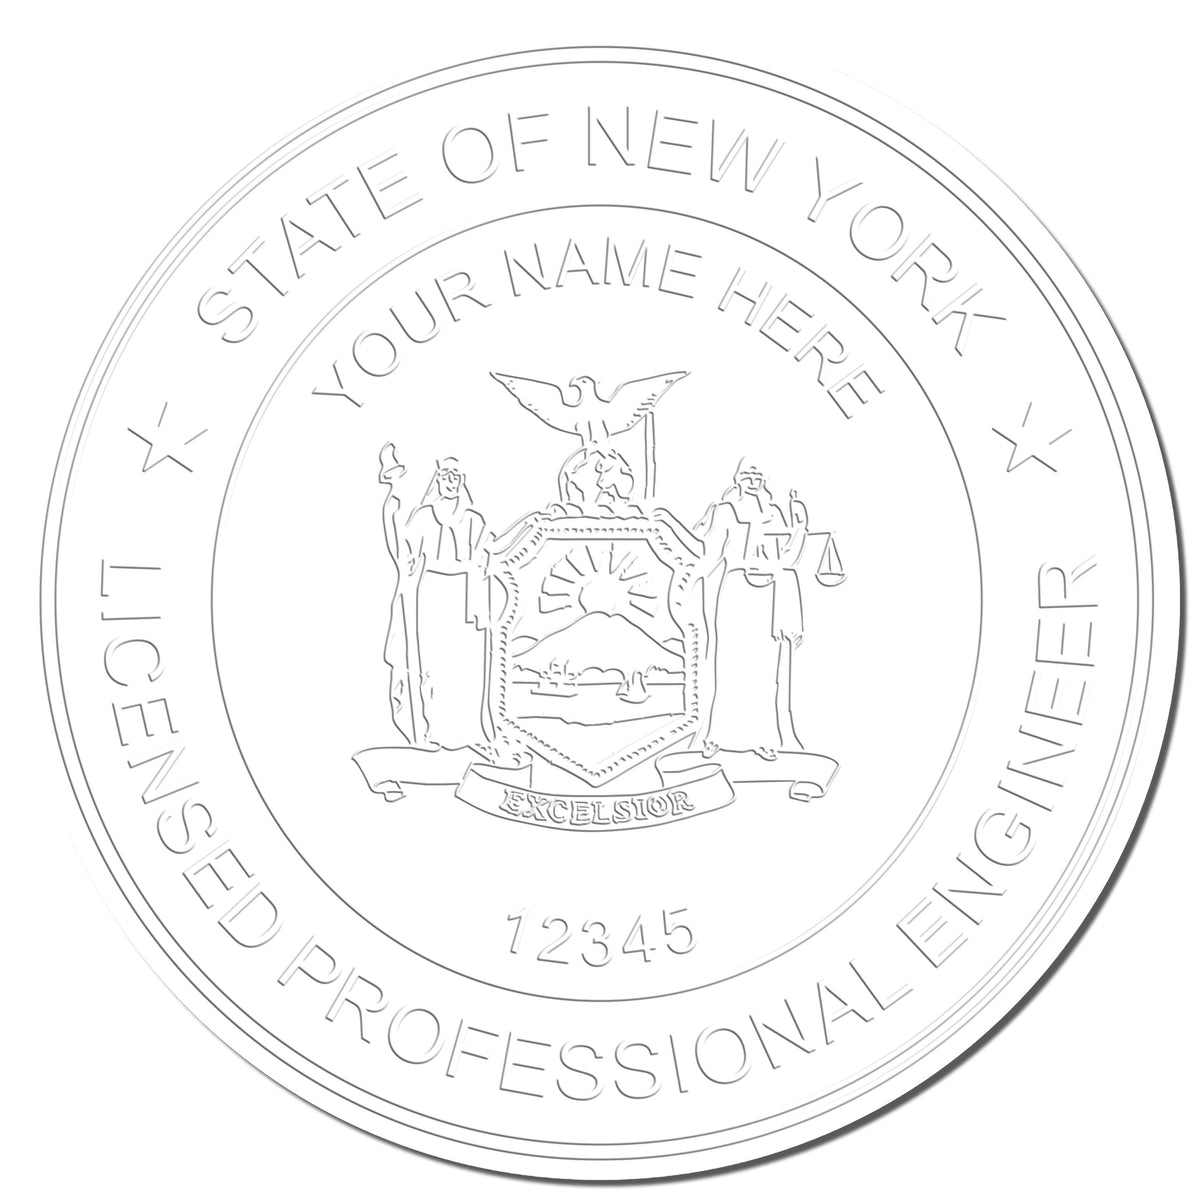 Another Example of a stamped impression of the New York Engineer Desk Seal on a piece of office paper.